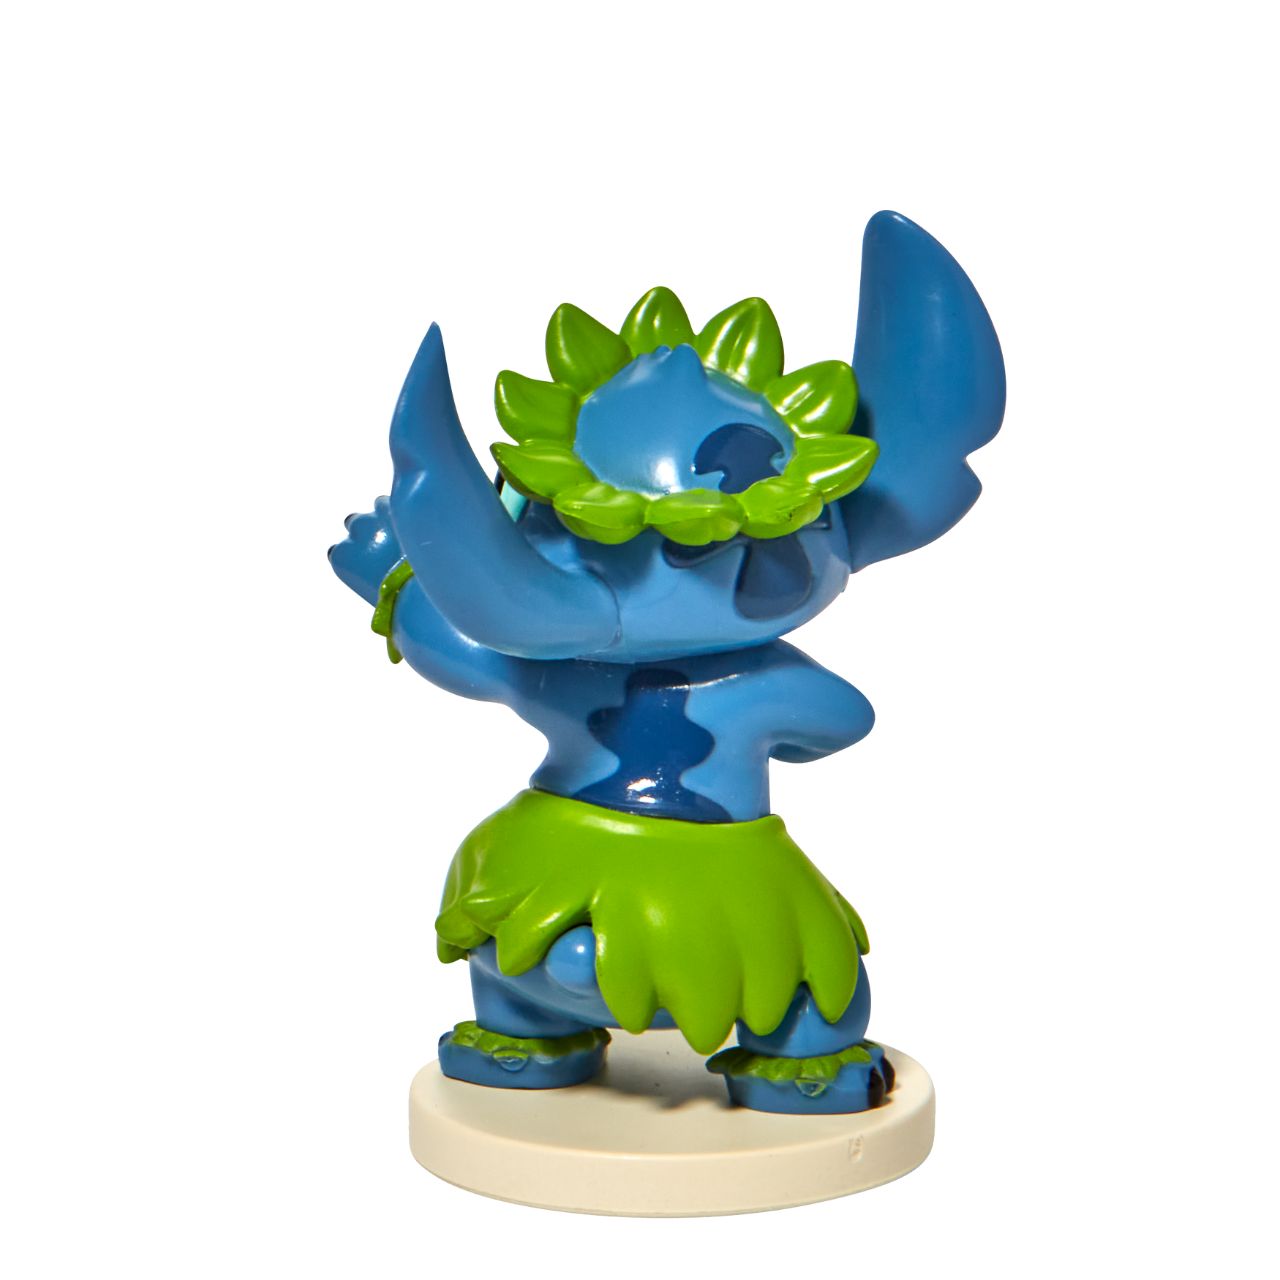 Grand Jester Studios Dancing Stitch Mini Figurine  This cute and fun dancing Stitch mini figurine by Grand jester Studios is the perfect addition to any Stitch or Disney collection. Dressed in his finest grass skirt, Stitch is ready to show off his dancing skills at the luau.